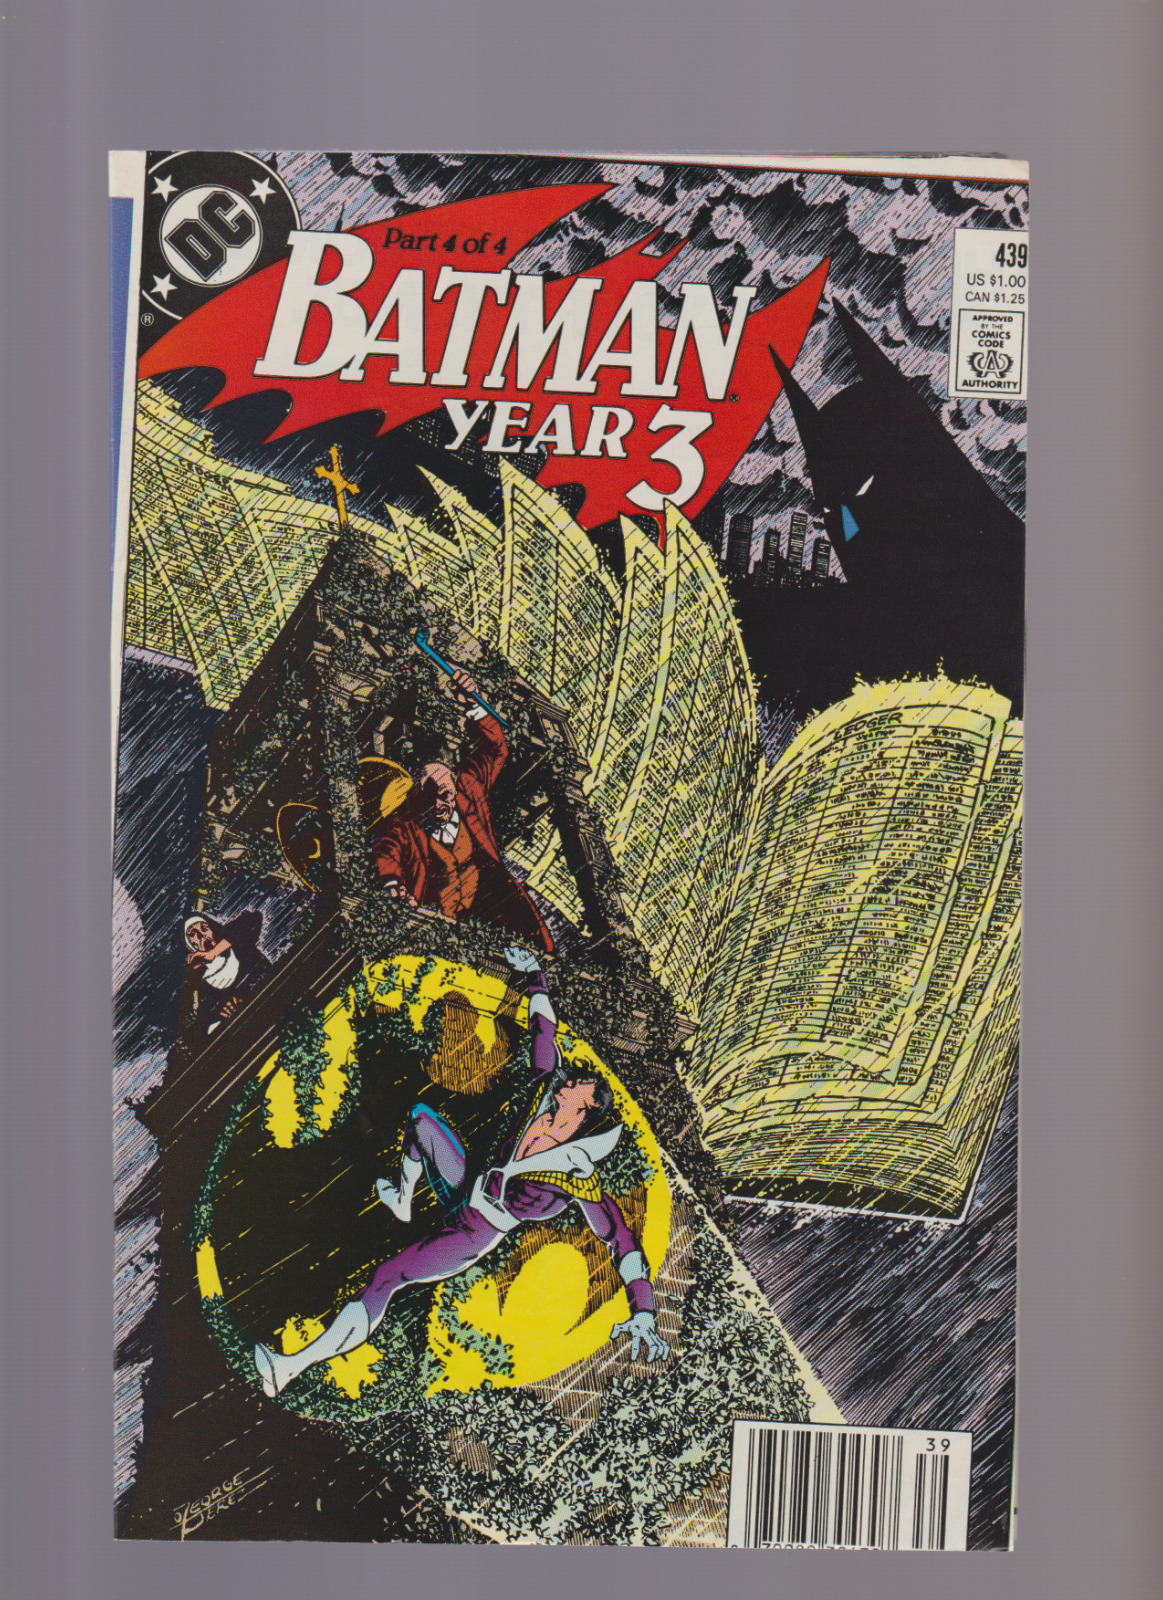 Batman #439 (1989)- NEWSSTAND SEVERAL FACTORY ERROR MISCUT COVER & PAGES